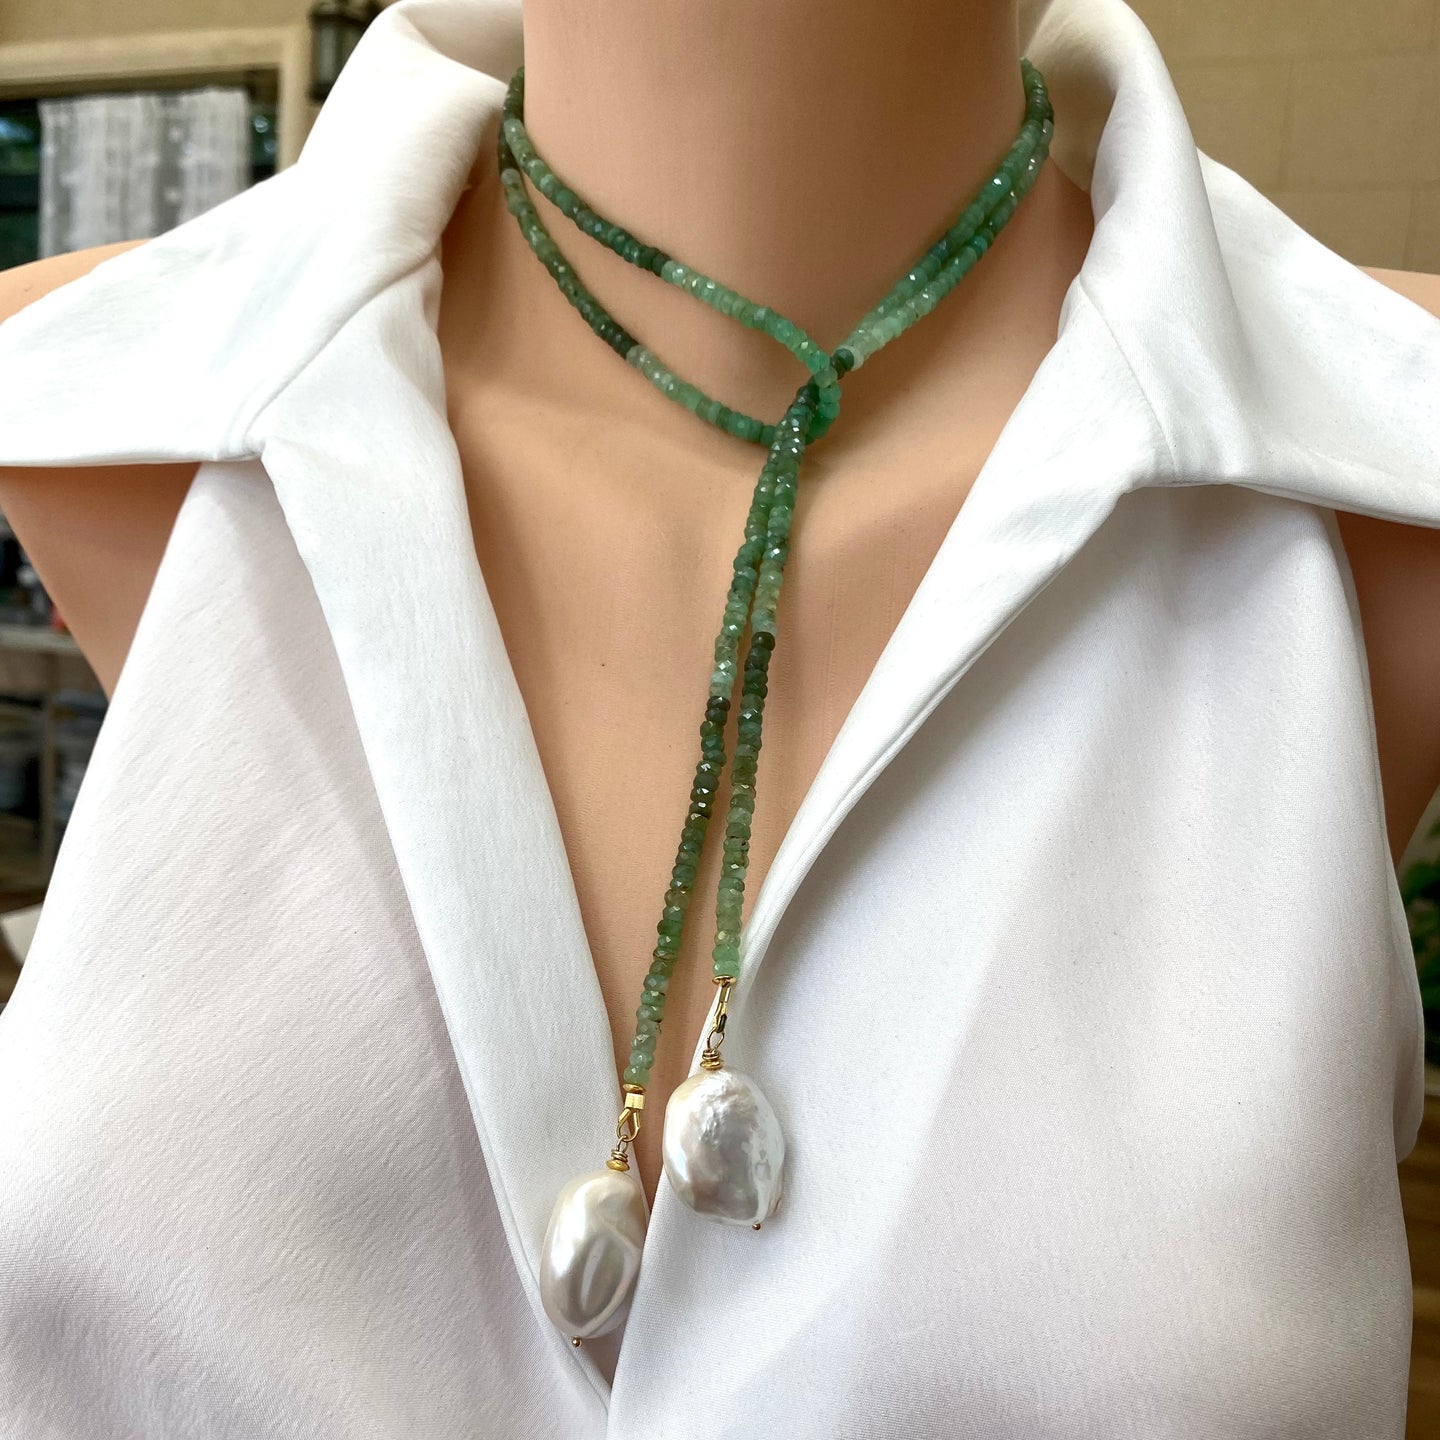 Shaded Green Chrysoprase Rondelle Beads & Two Baroque Pearls Lariat Wrap Necklace, Gold Plated silver, 42